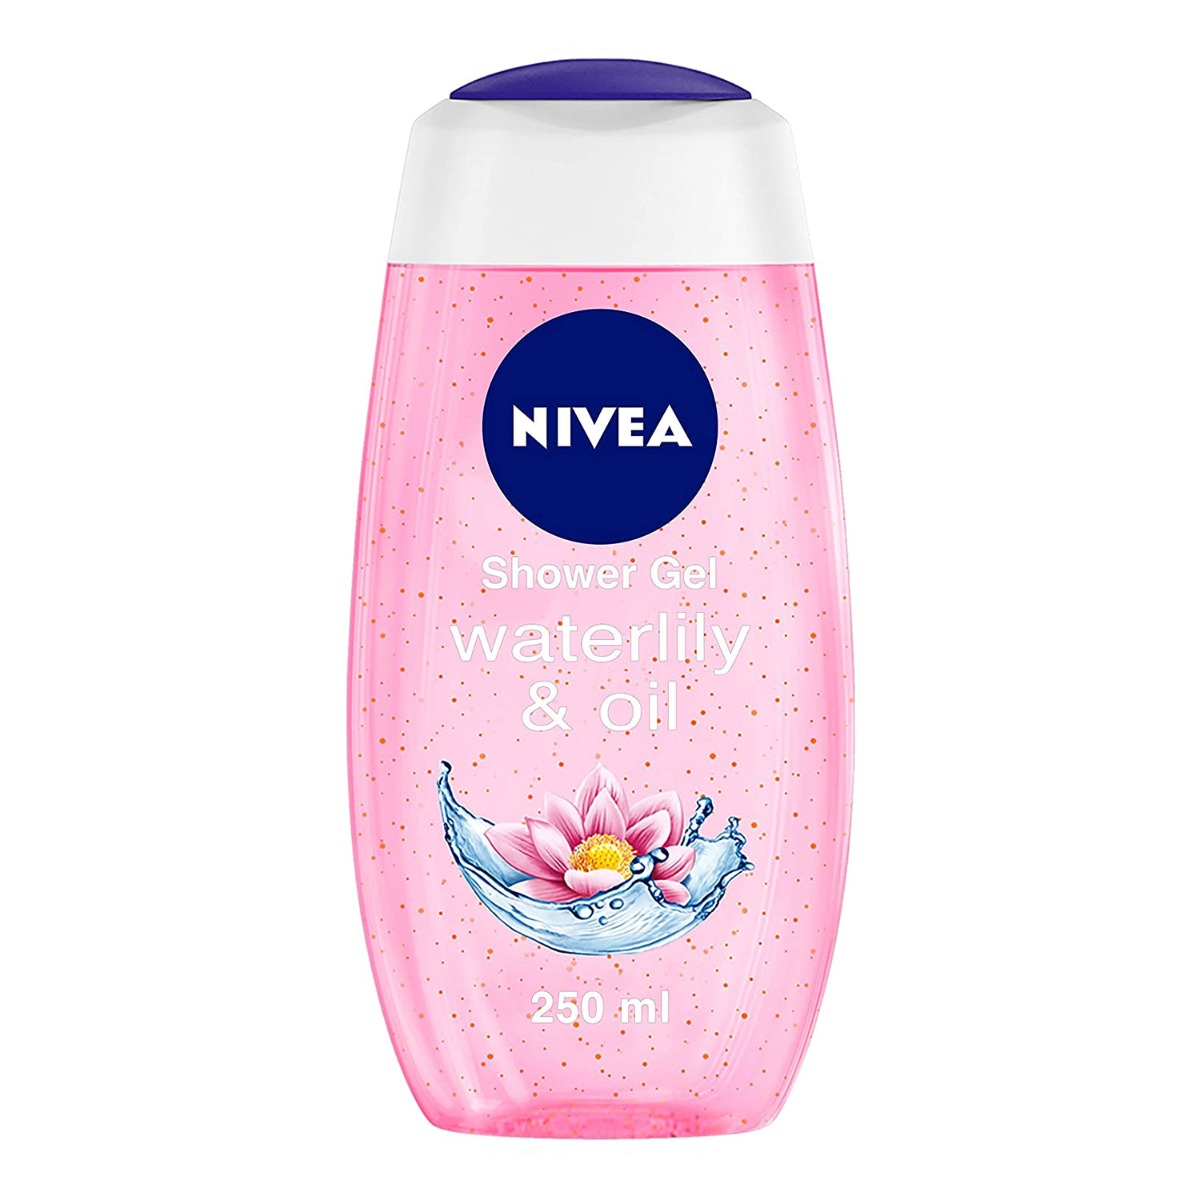 Nivea waterlily and oil shower gel, 250ml